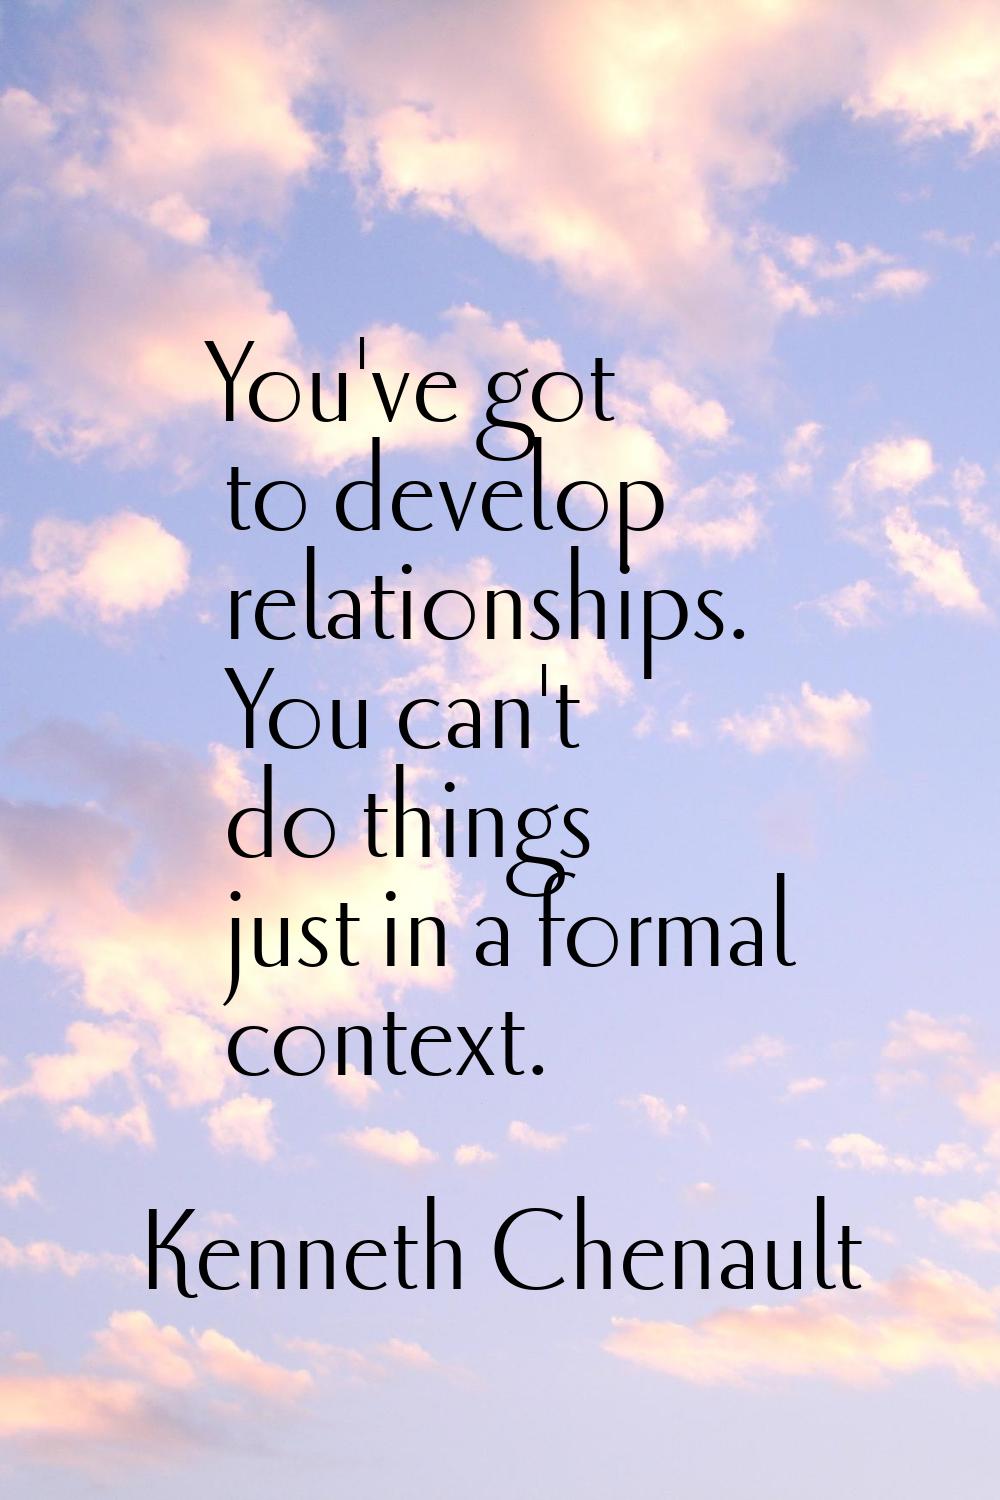 You've got to develop relationships. You can't do things just in a formal context.